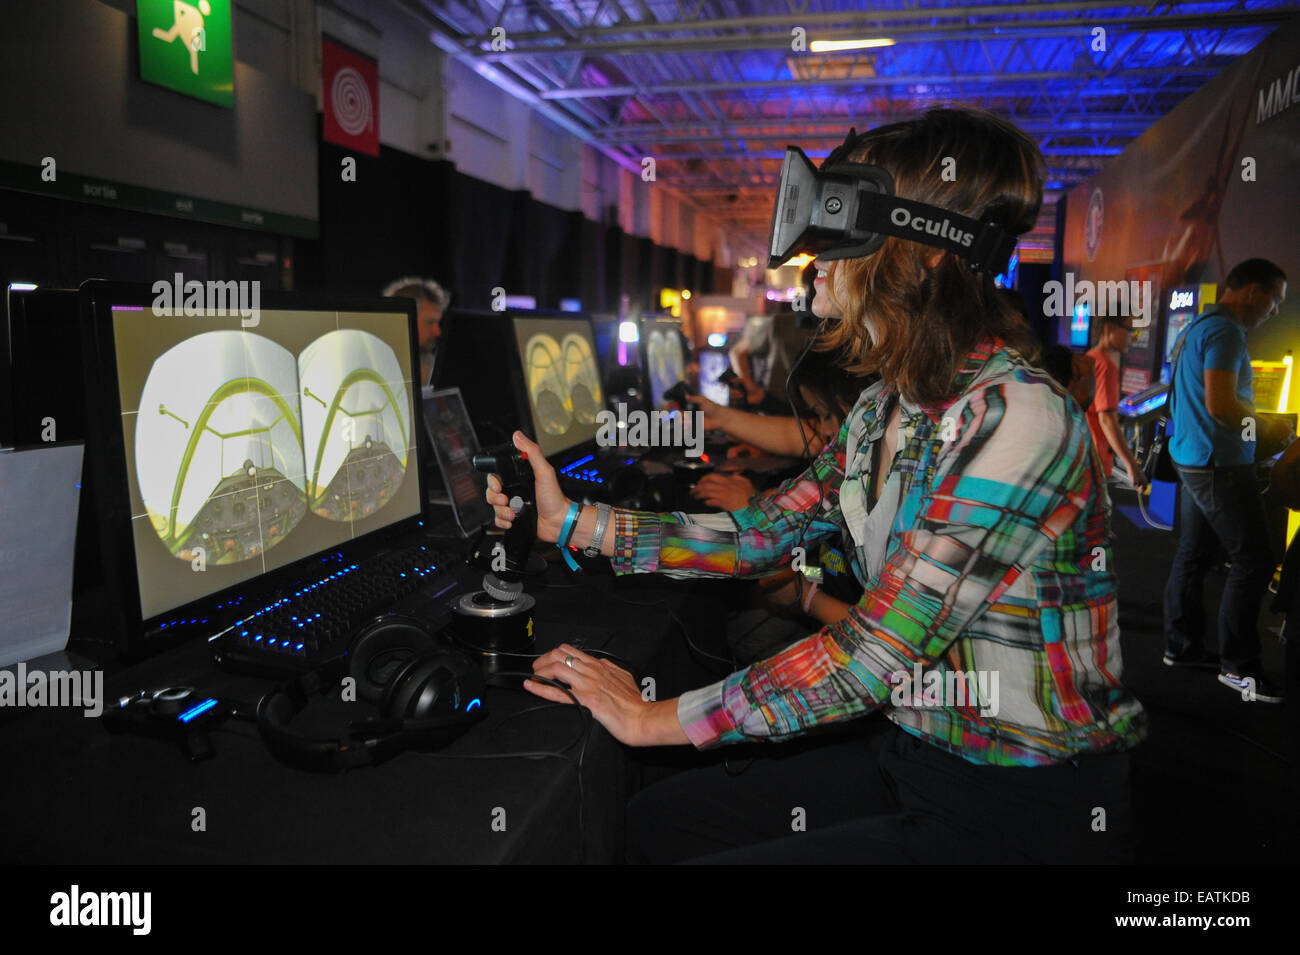 August 13, 2014 - Paris, France:  A video game player tries the Oculus Rift, a 3D virtual reality headset. The computer screen d Stock Photo